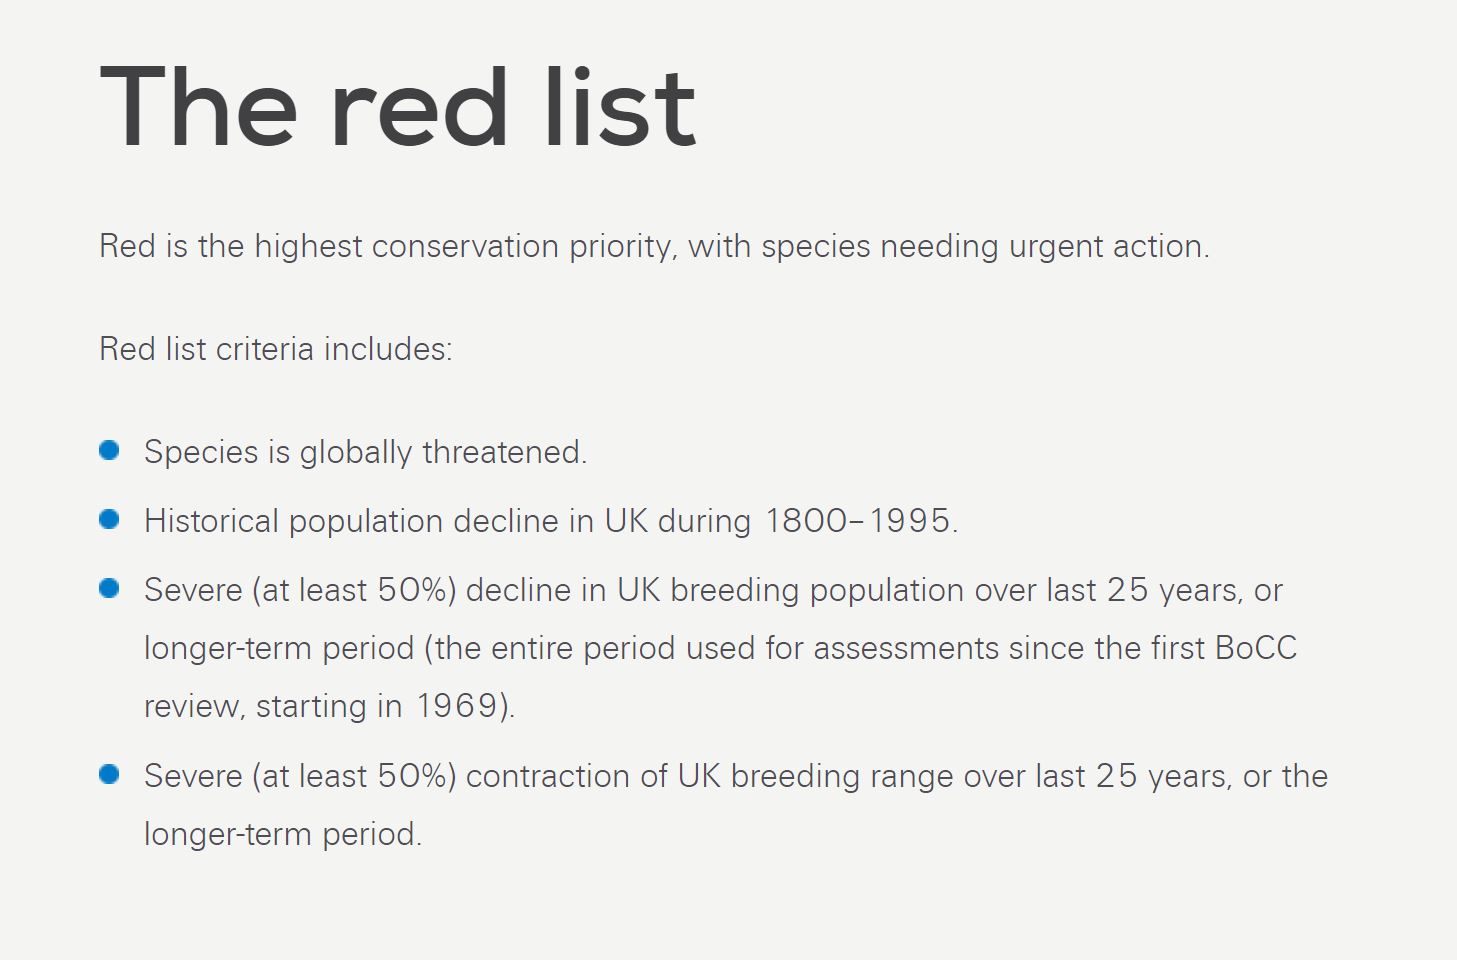 RSPB - The Red List